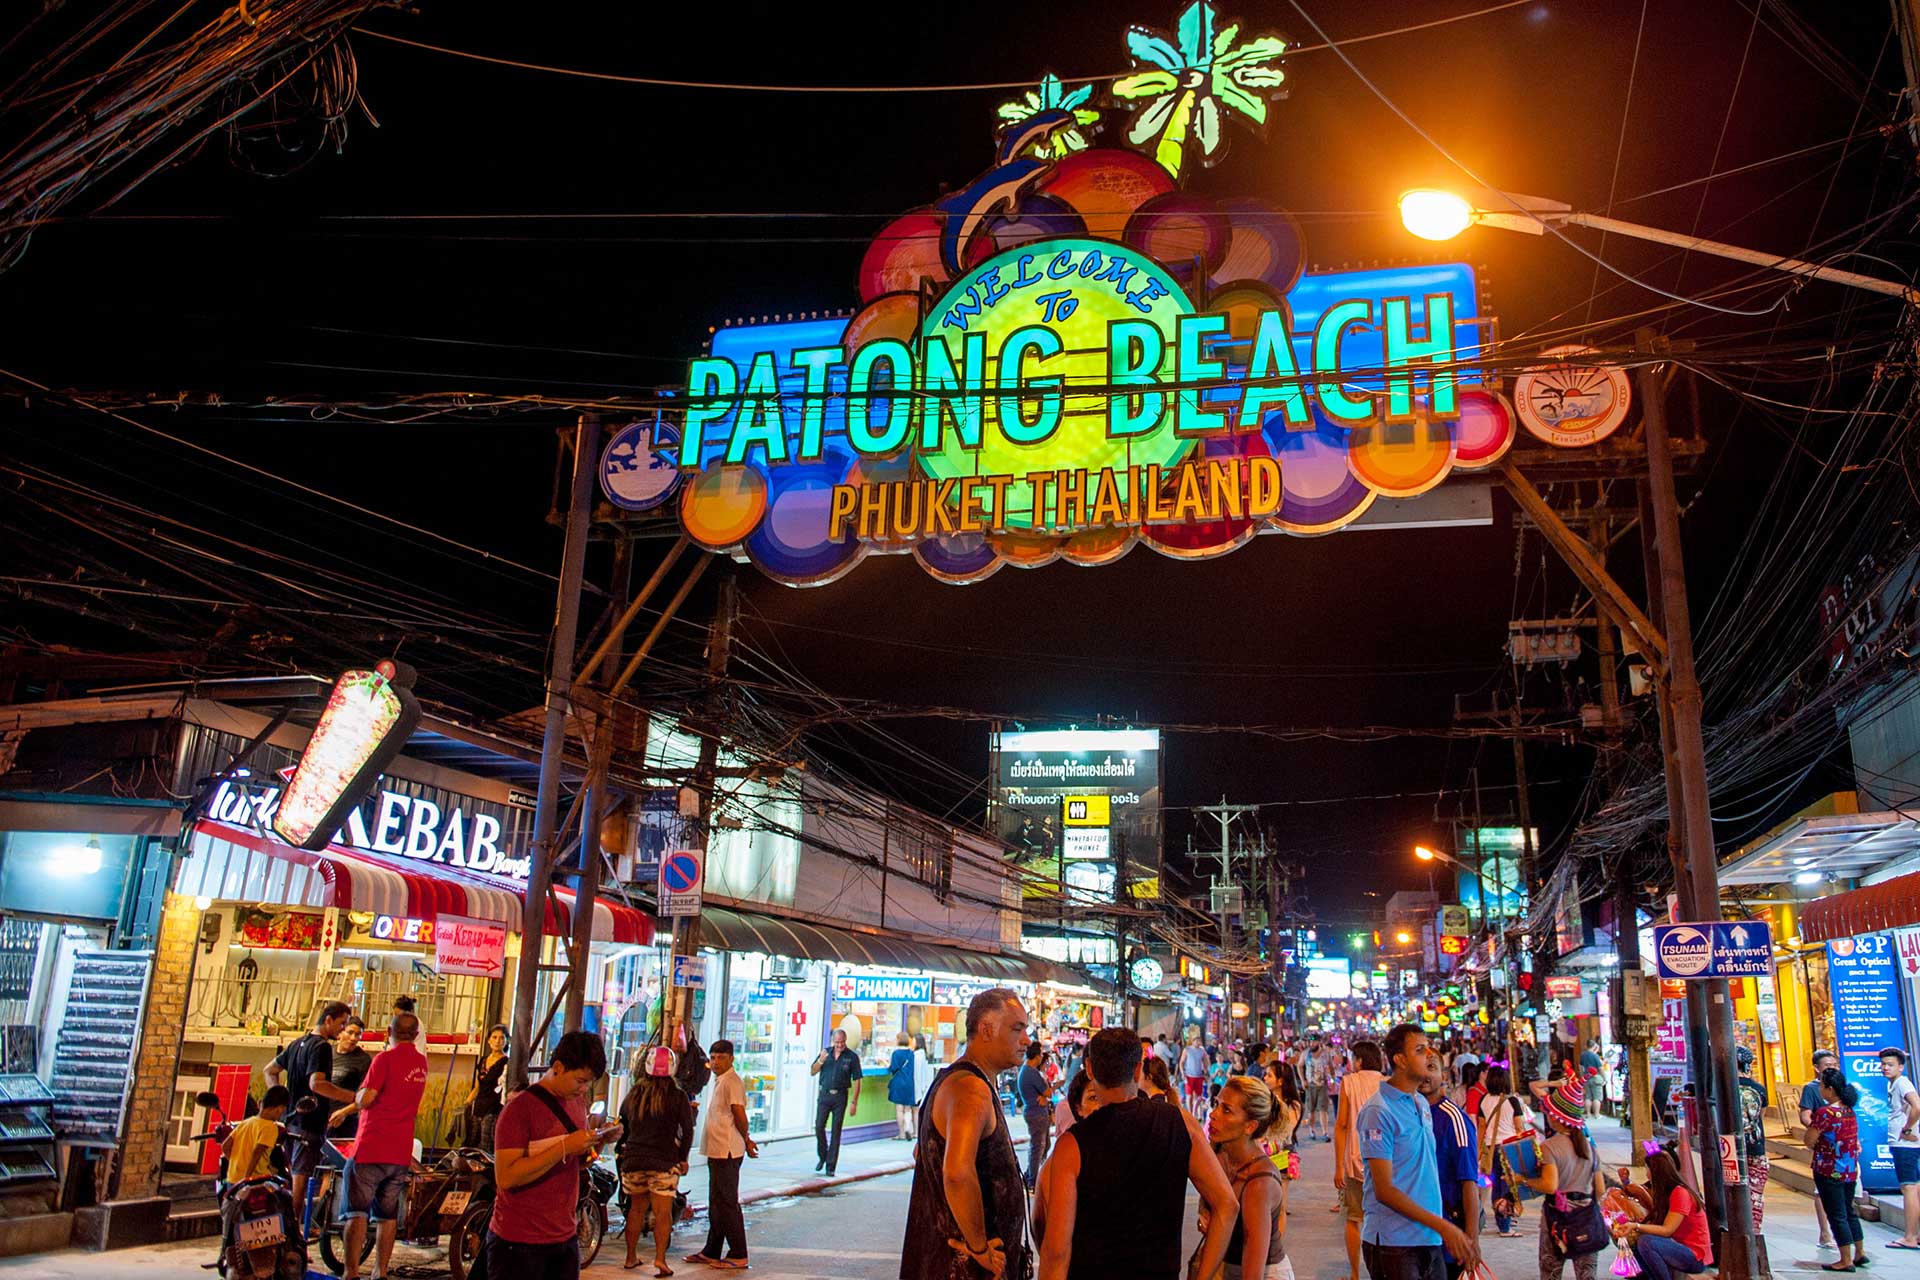 Julie's Travel Blog: Looking for a Ping Pong Show in Phuket